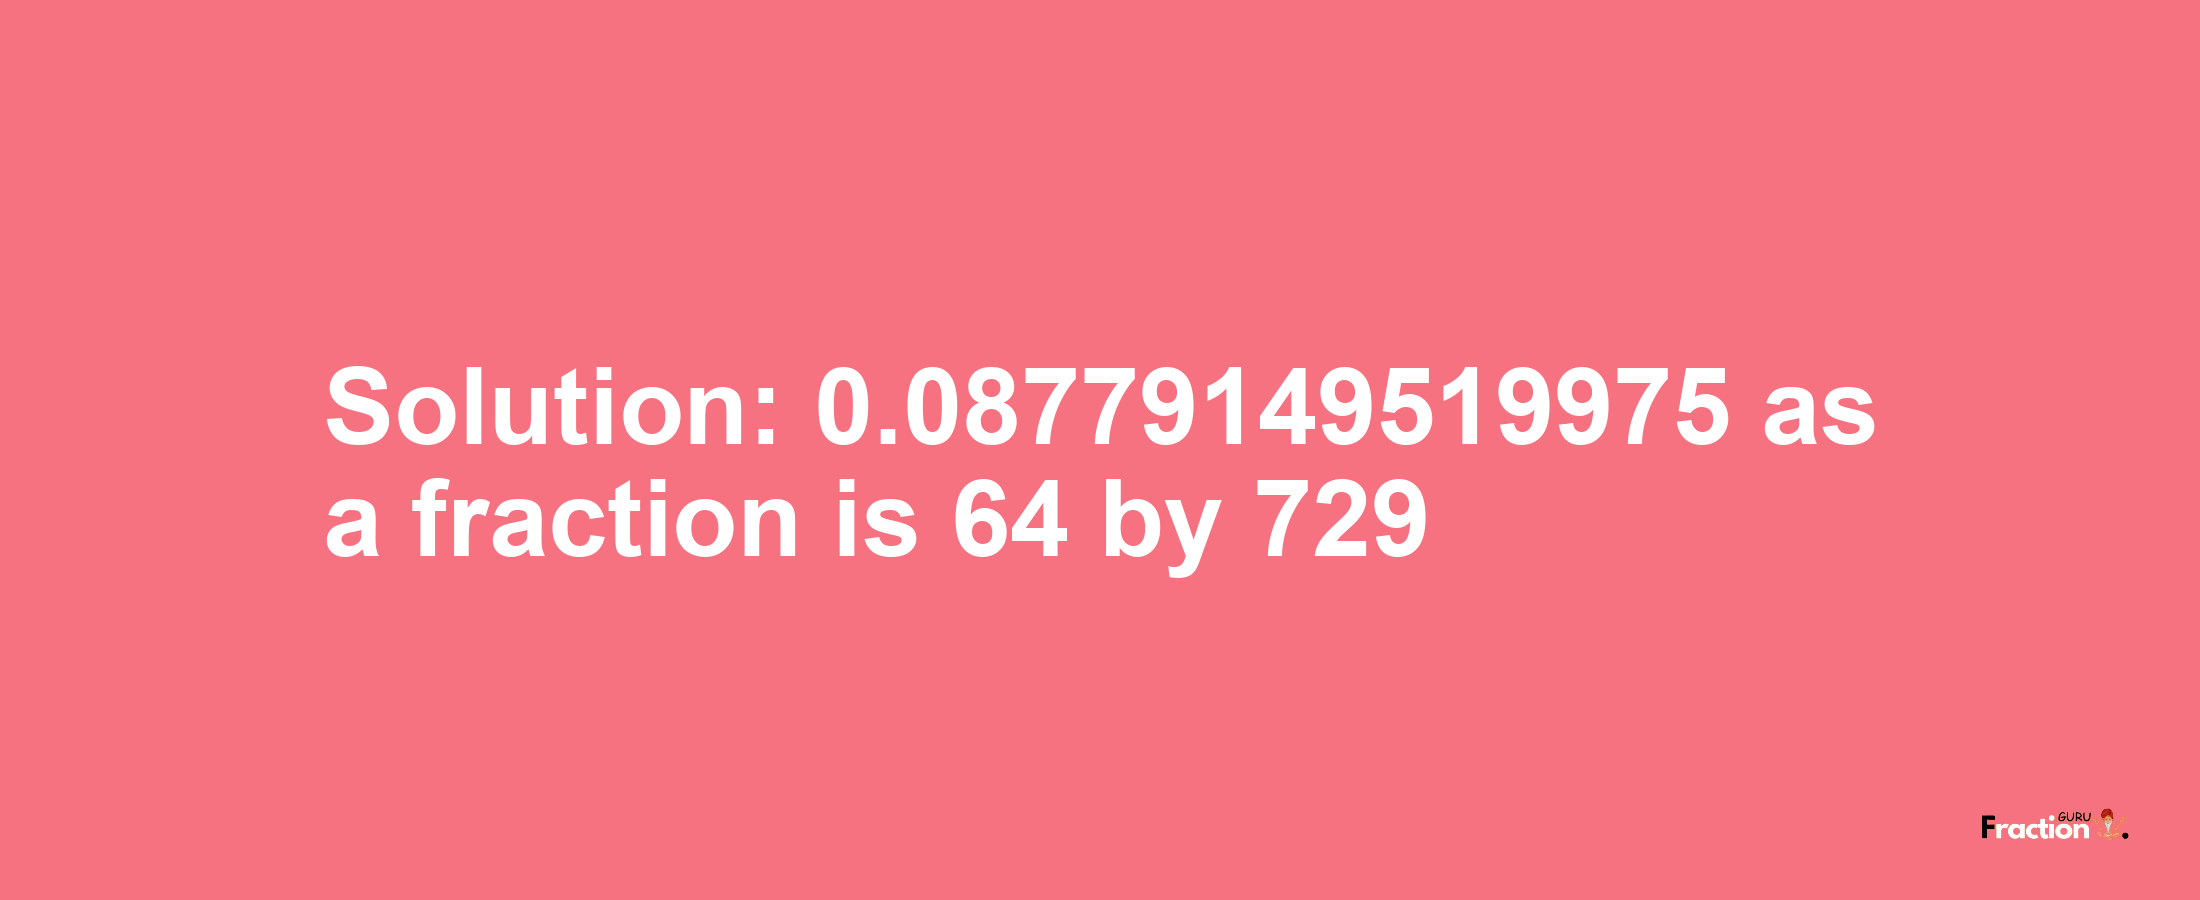 Solution:0.08779149519975 as a fraction is 64/729